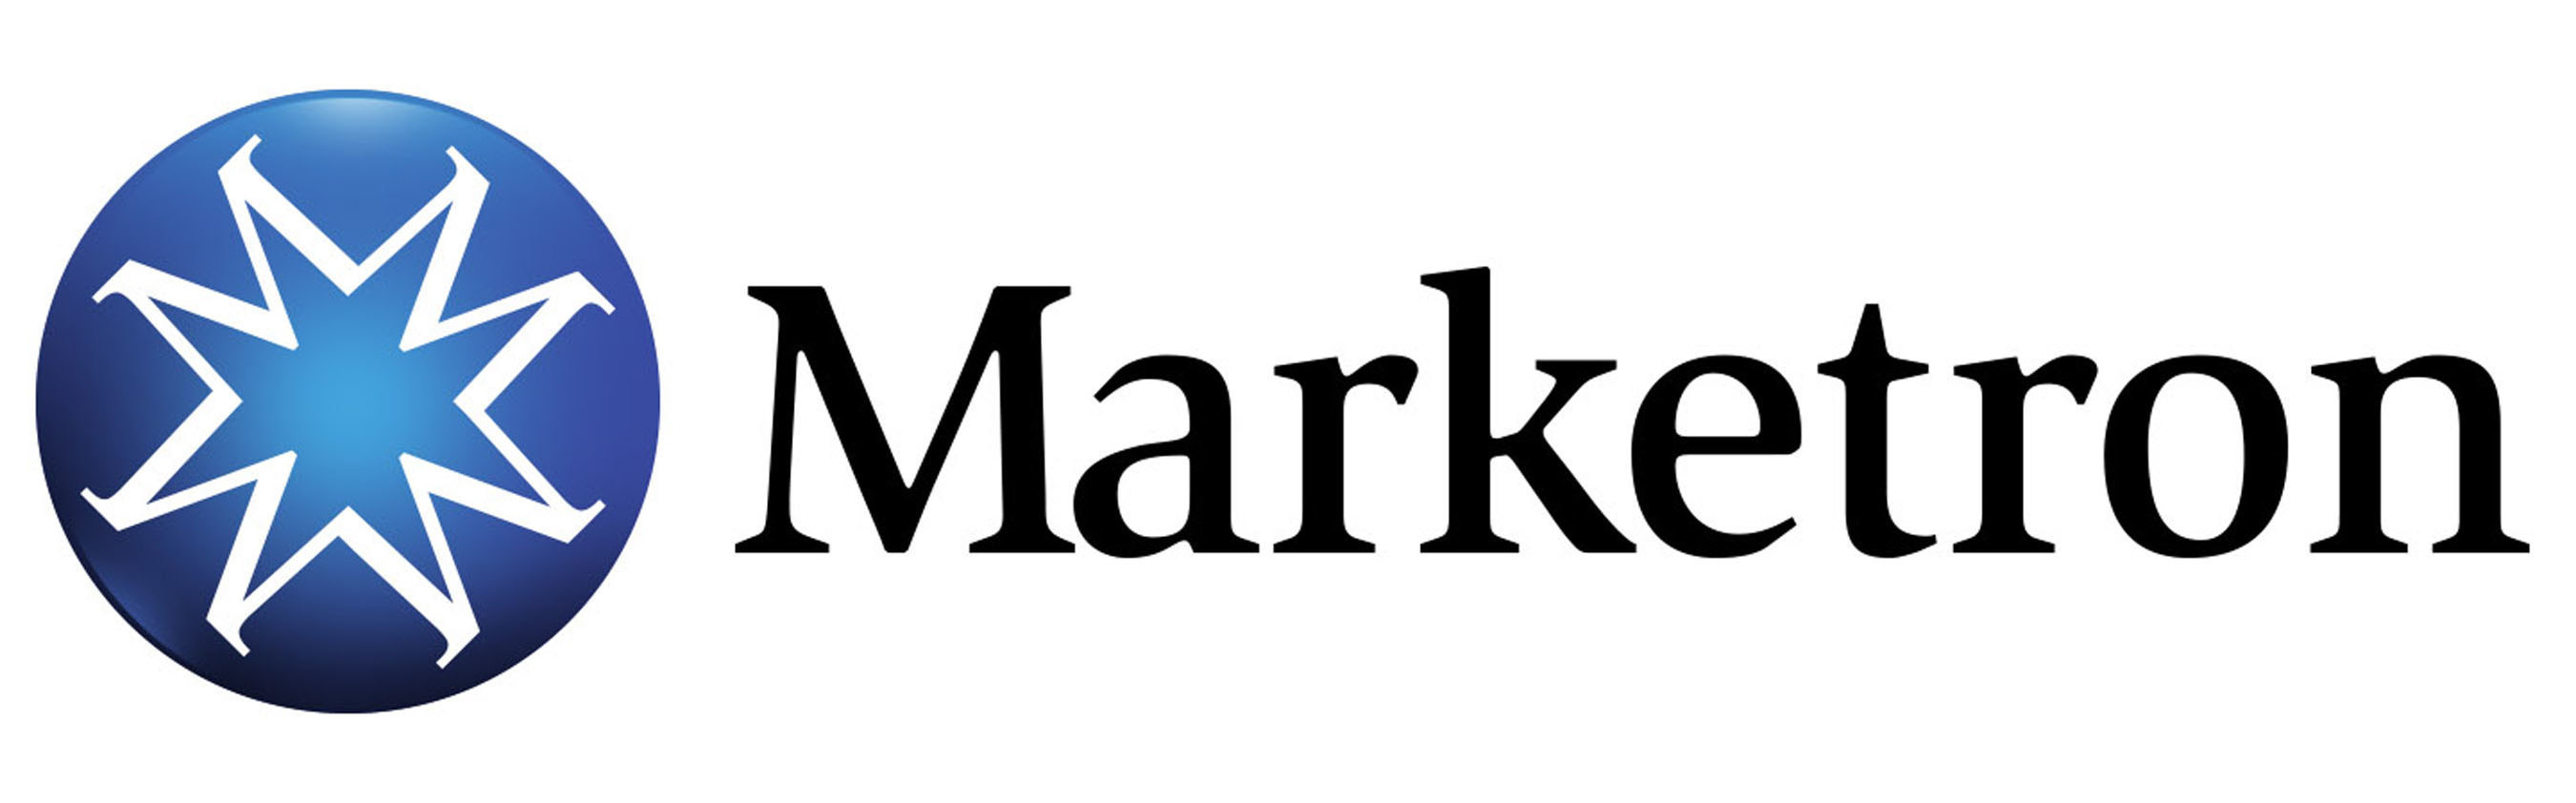 Marketron, enabling media companies to manage revenue and audience touch points with innovative solutions